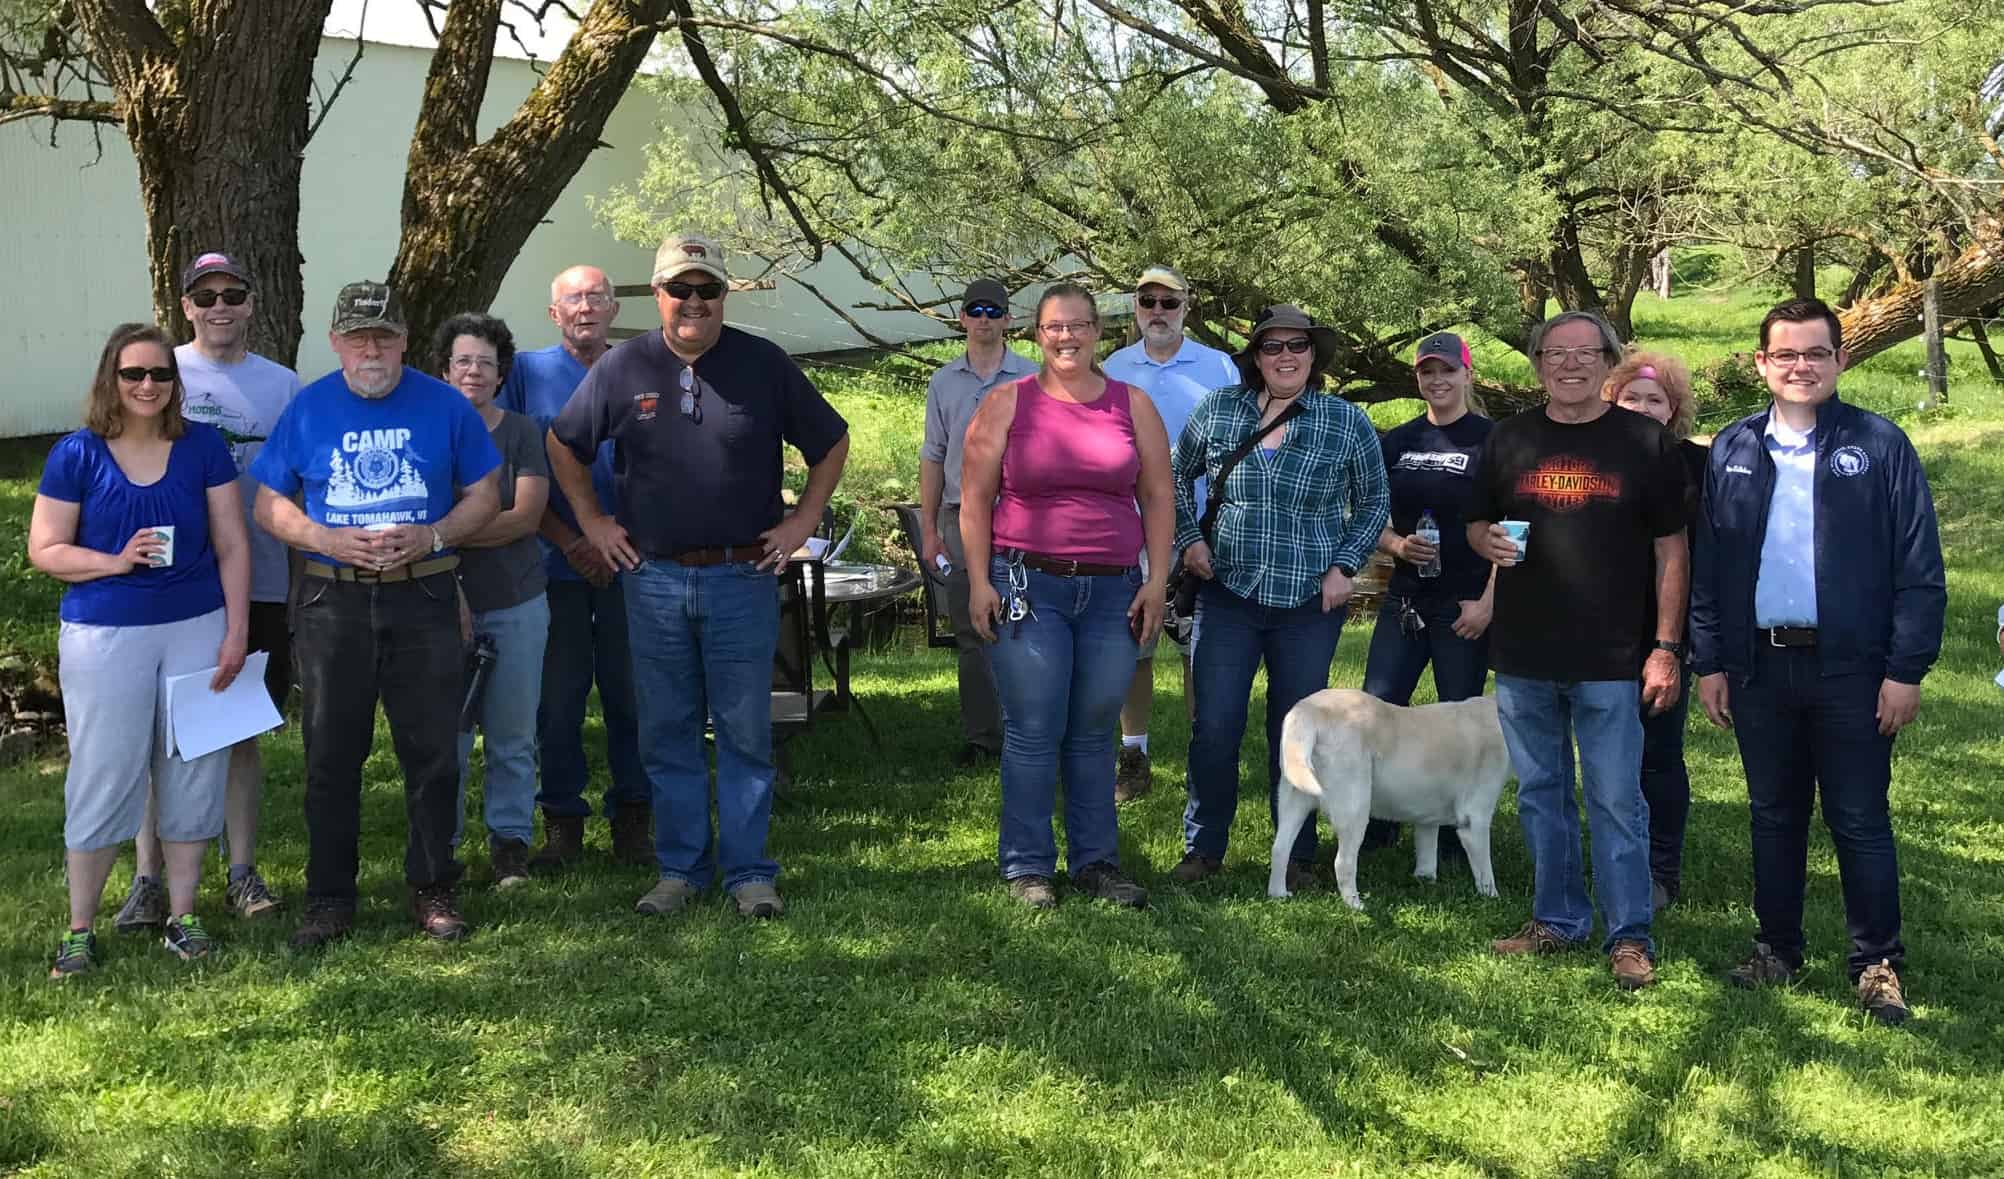 Tour of Lincoln County farms provides opportunity to learn about grass-fed beef operations